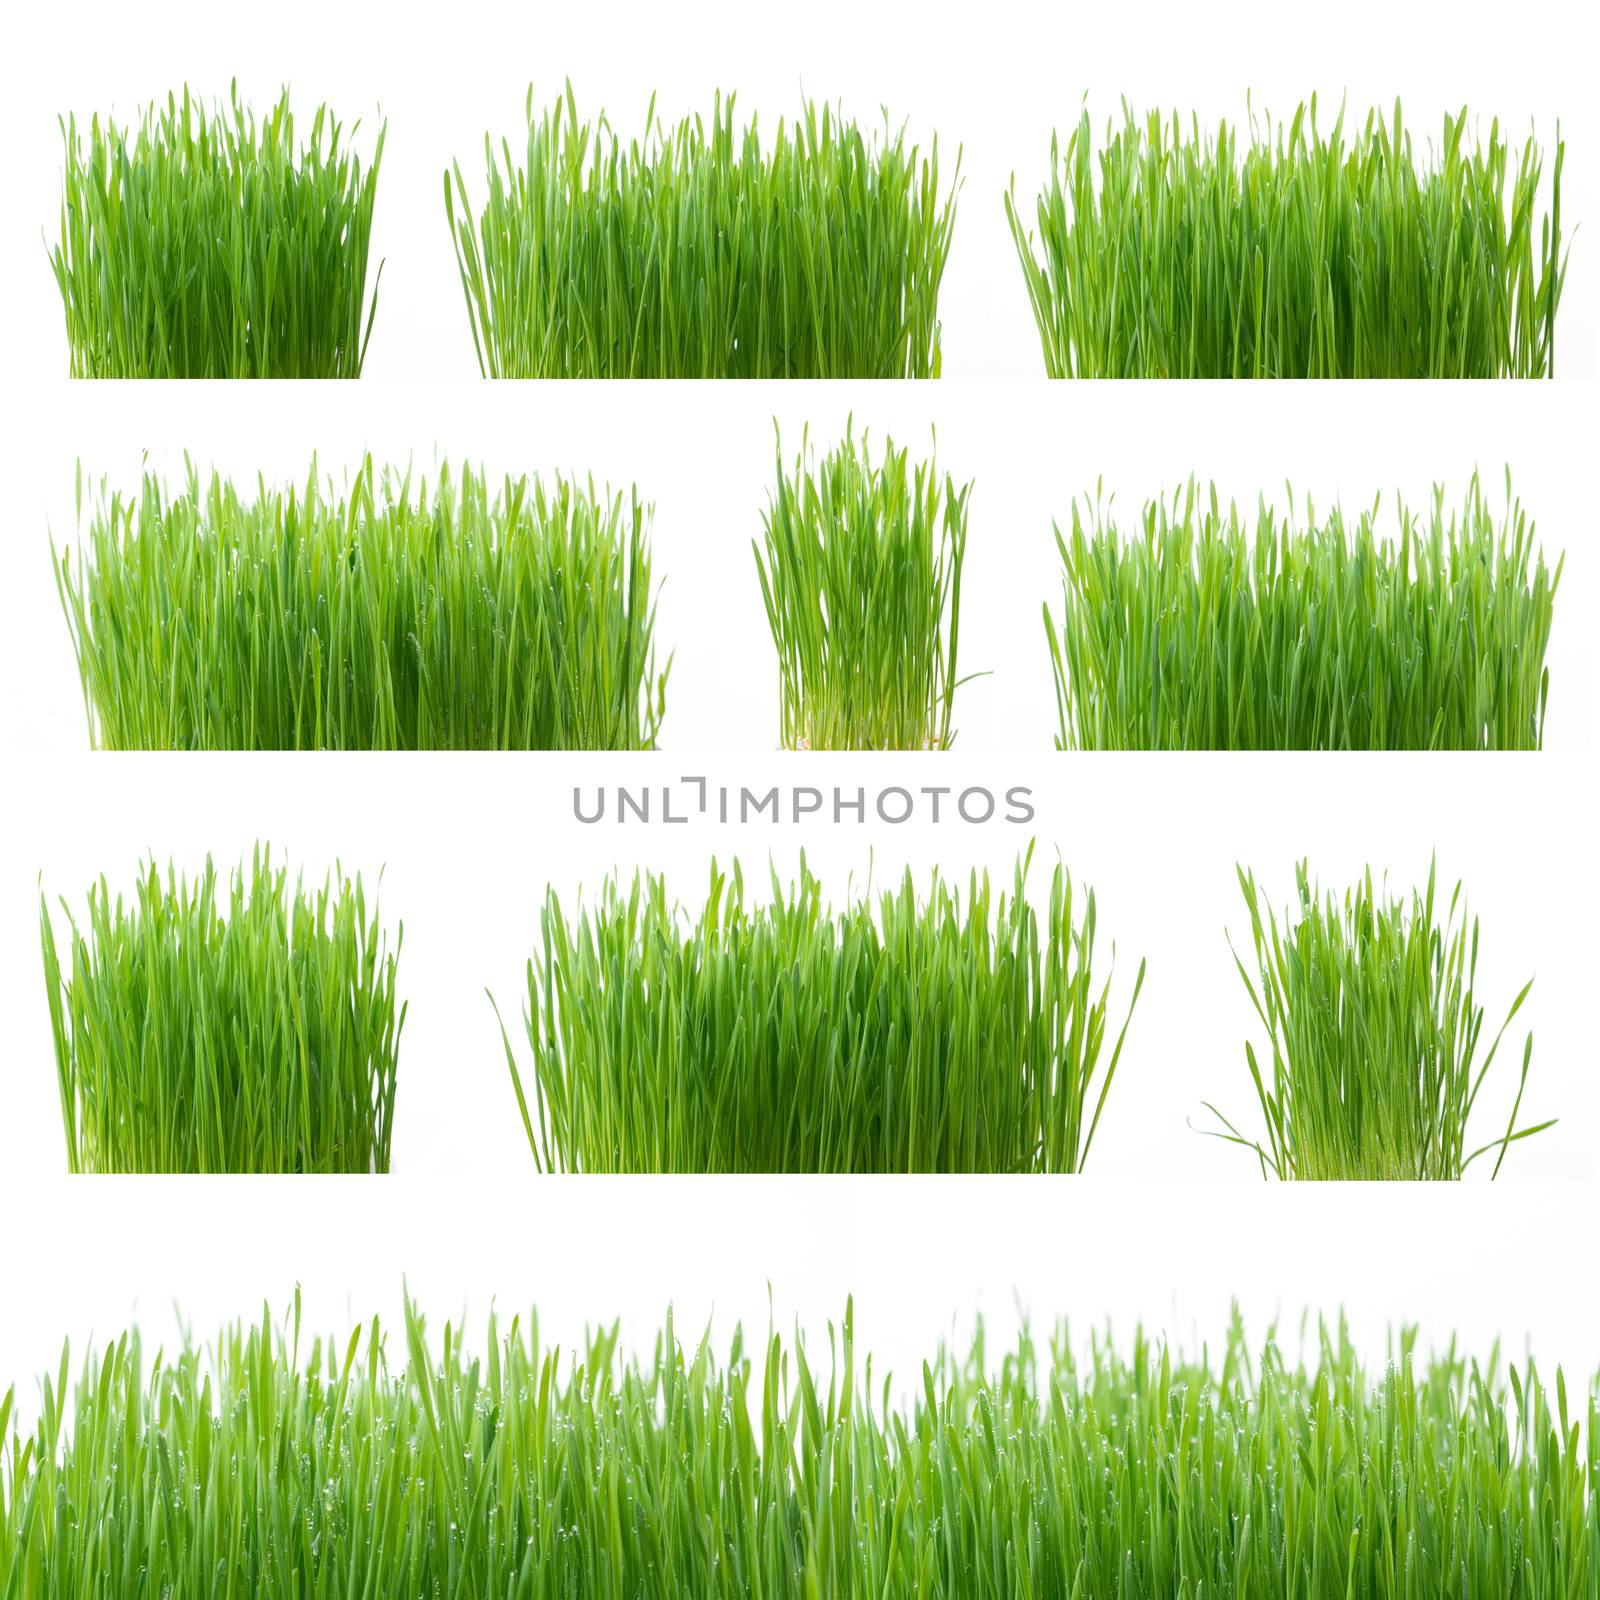 fresh green wheat grass isolated on white background